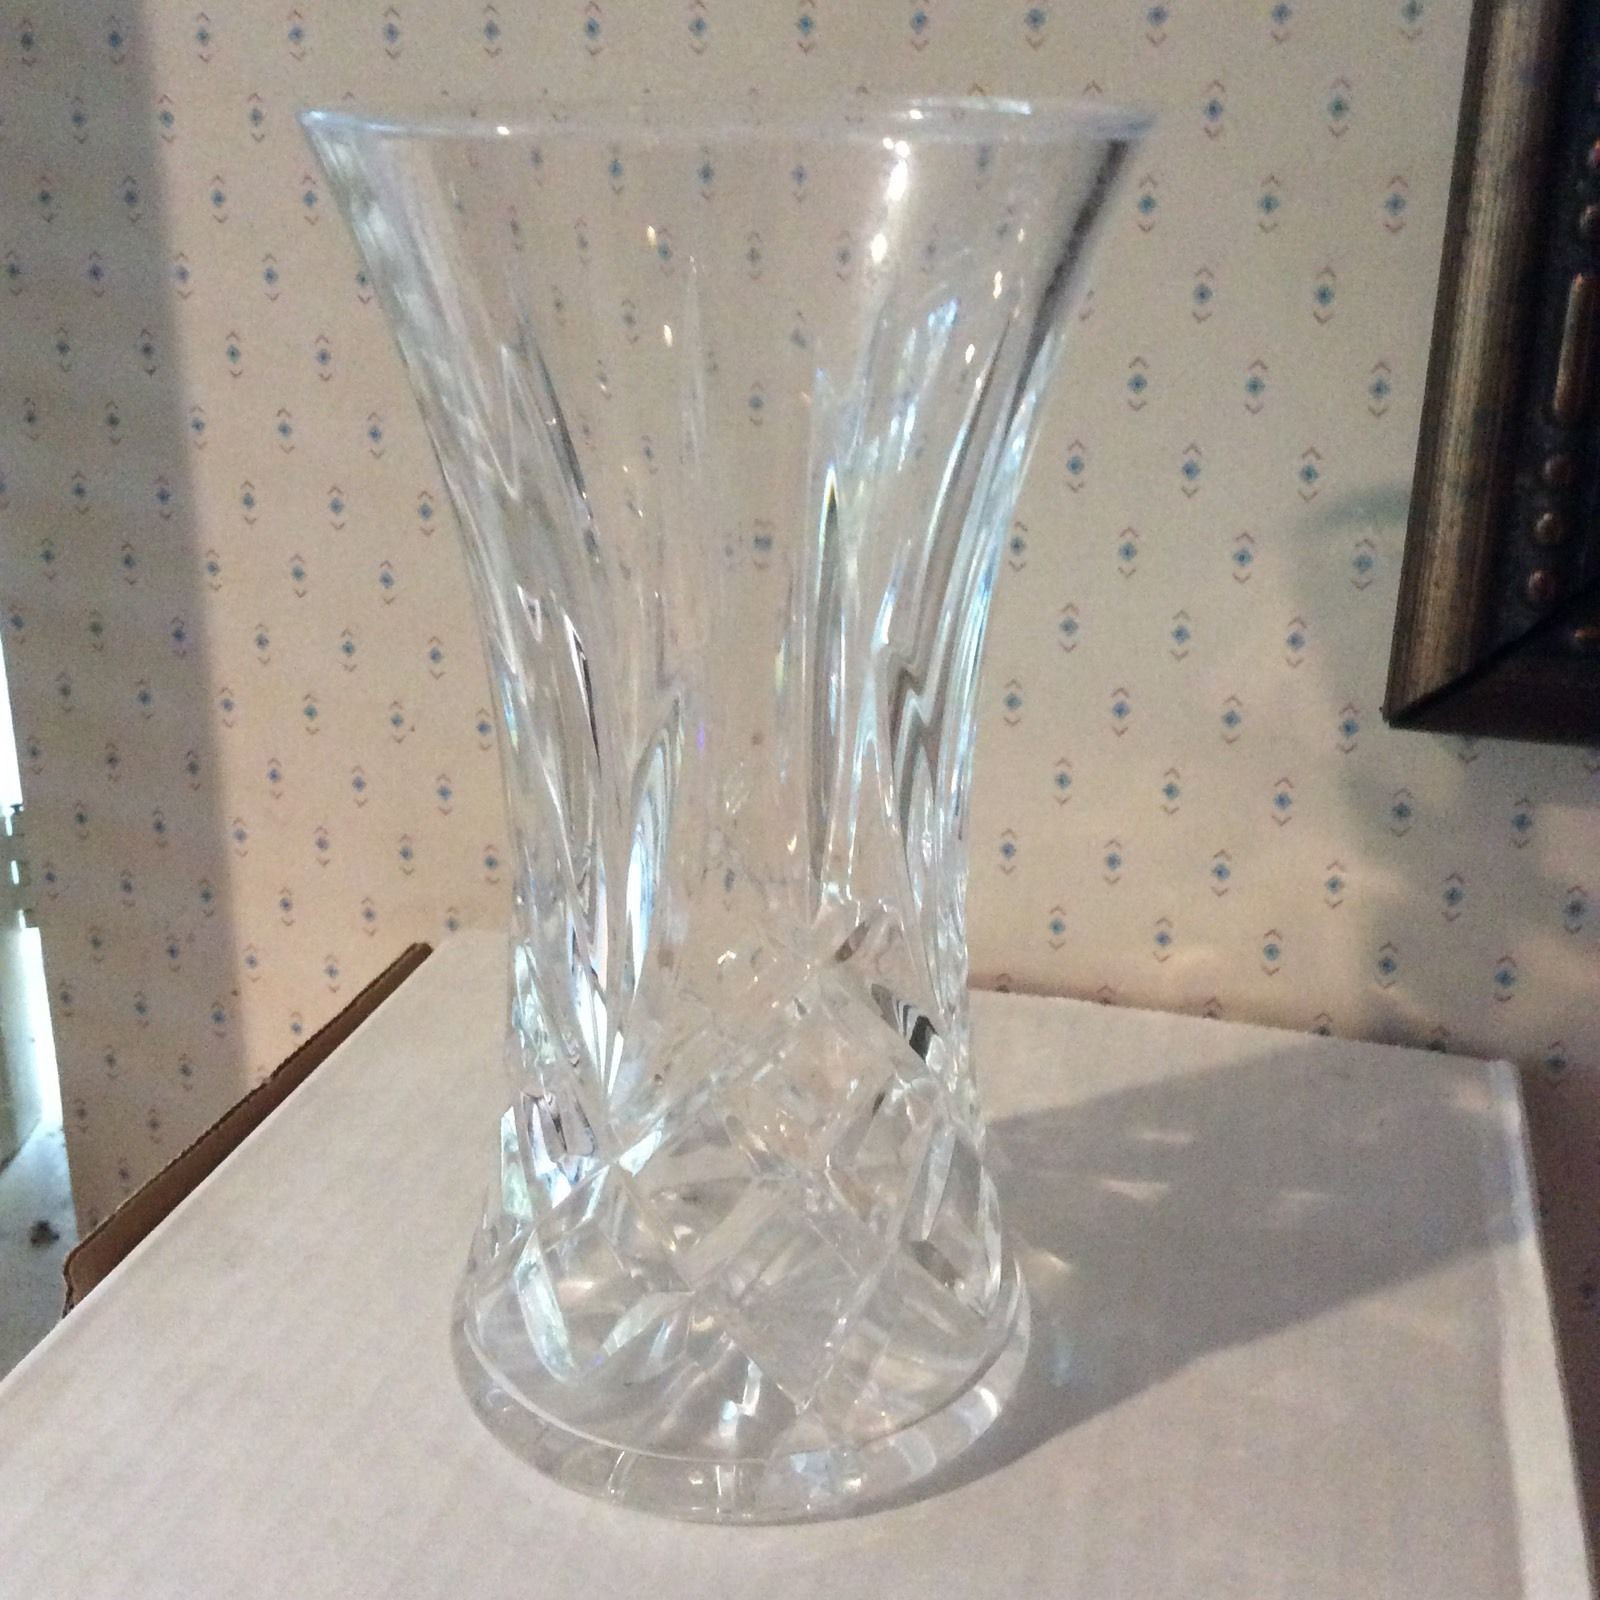 25 Fashionable Retired Waterford Crystal Vase Patterns 2023 free download retired waterford crystal vase patterns of vintage waterford crystal araglin vase 7 tall 49 99 picclick throughout vintage waterford crystal araglin vase 7 tall 1 of 7only 1 available